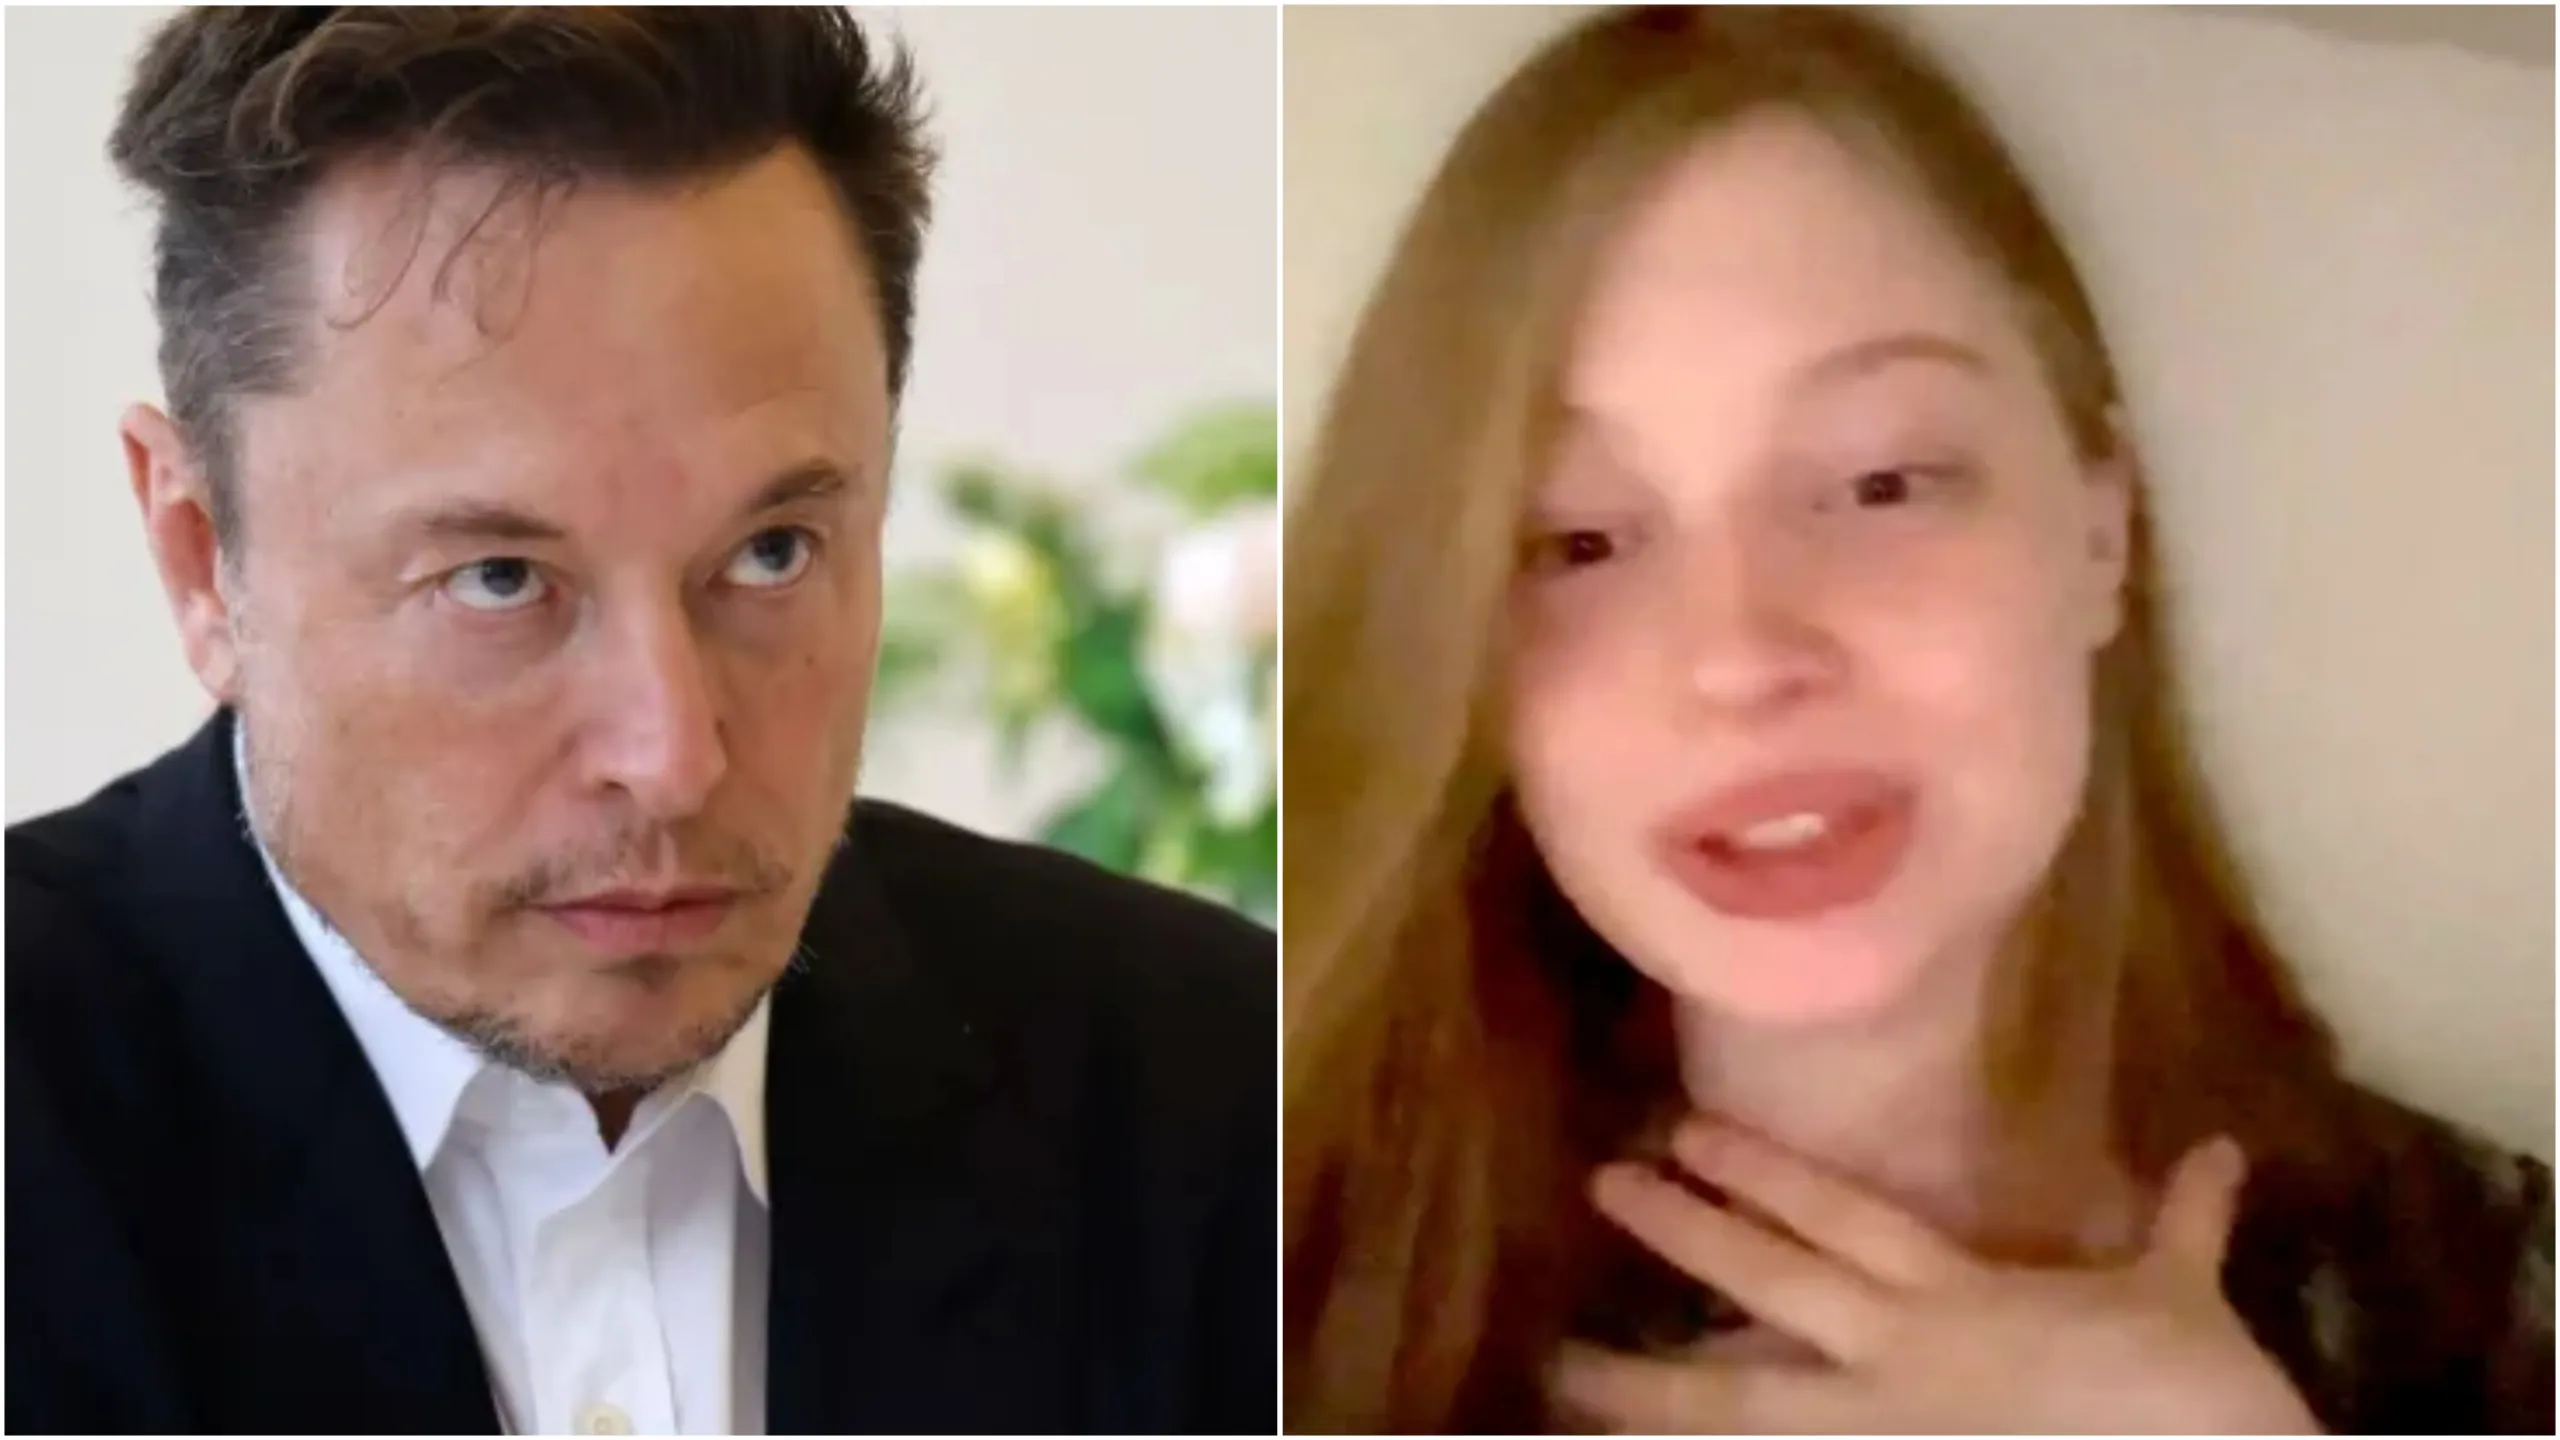 Elon Musk's trans daughter blasts him on social media: 'Touch some f**king grass'